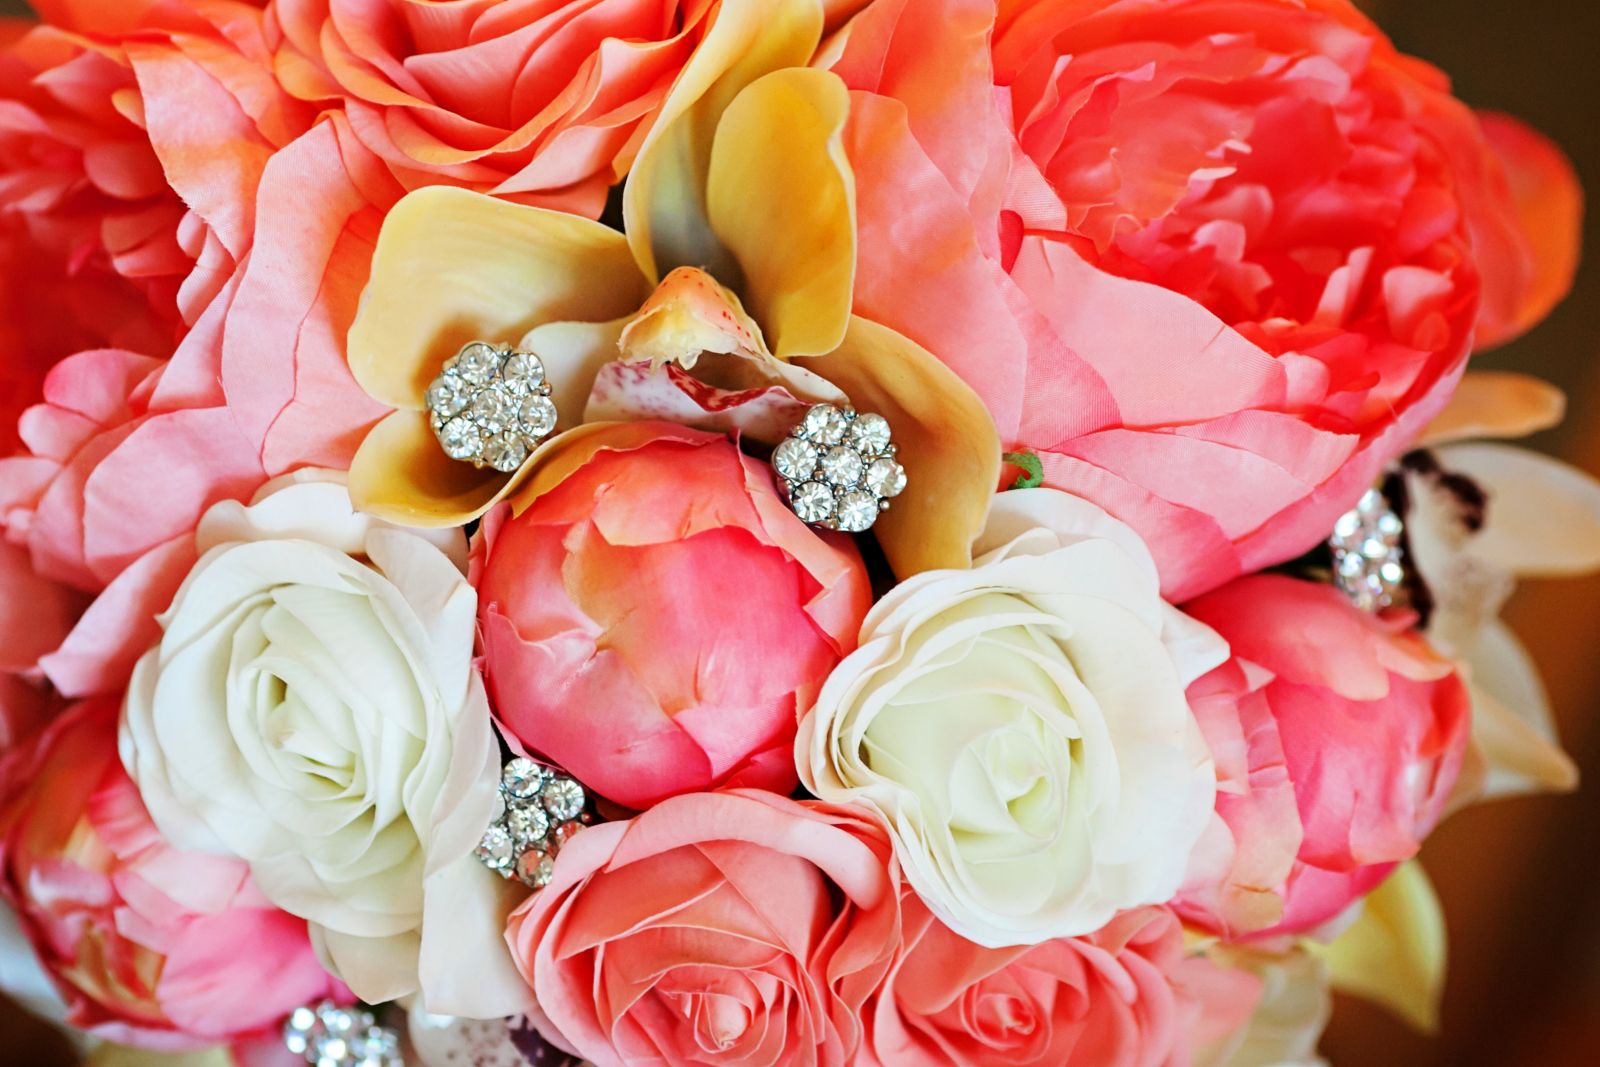 Share Your "Real Touch" Flower Ideas & Bouquets!